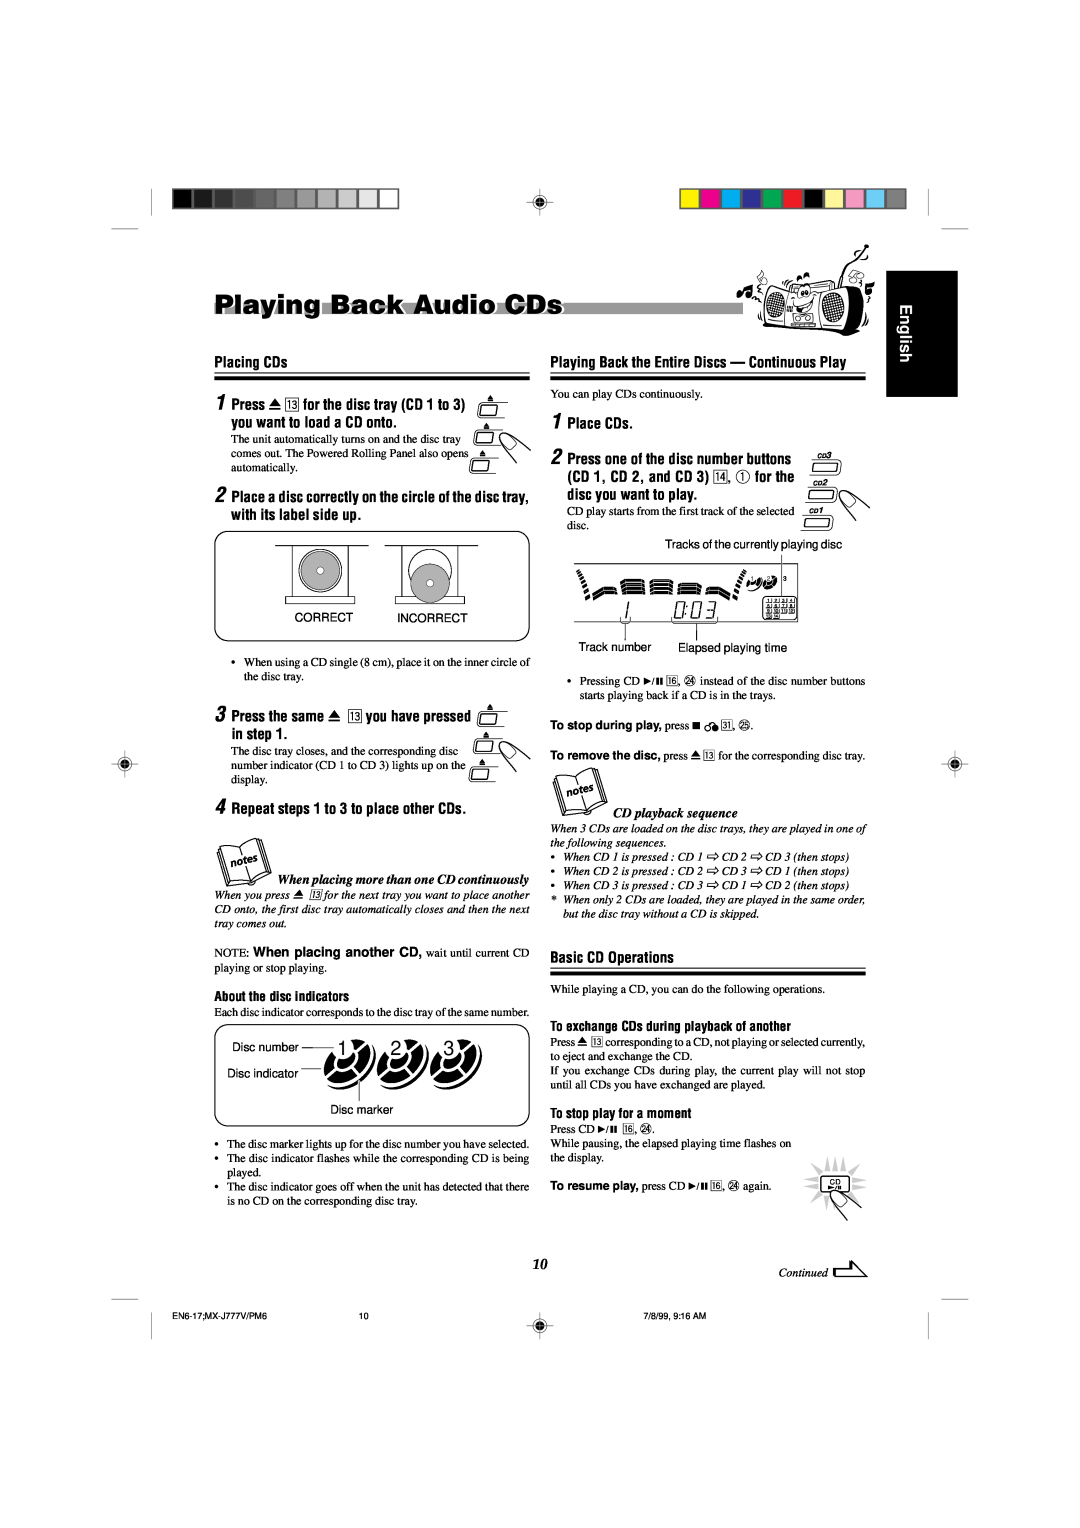 JVC CA-MXJ787V Playing Back Audio CDs, English, Placing CDs, Playing Back the Entire Discs - Continuous Play, Place CDs 